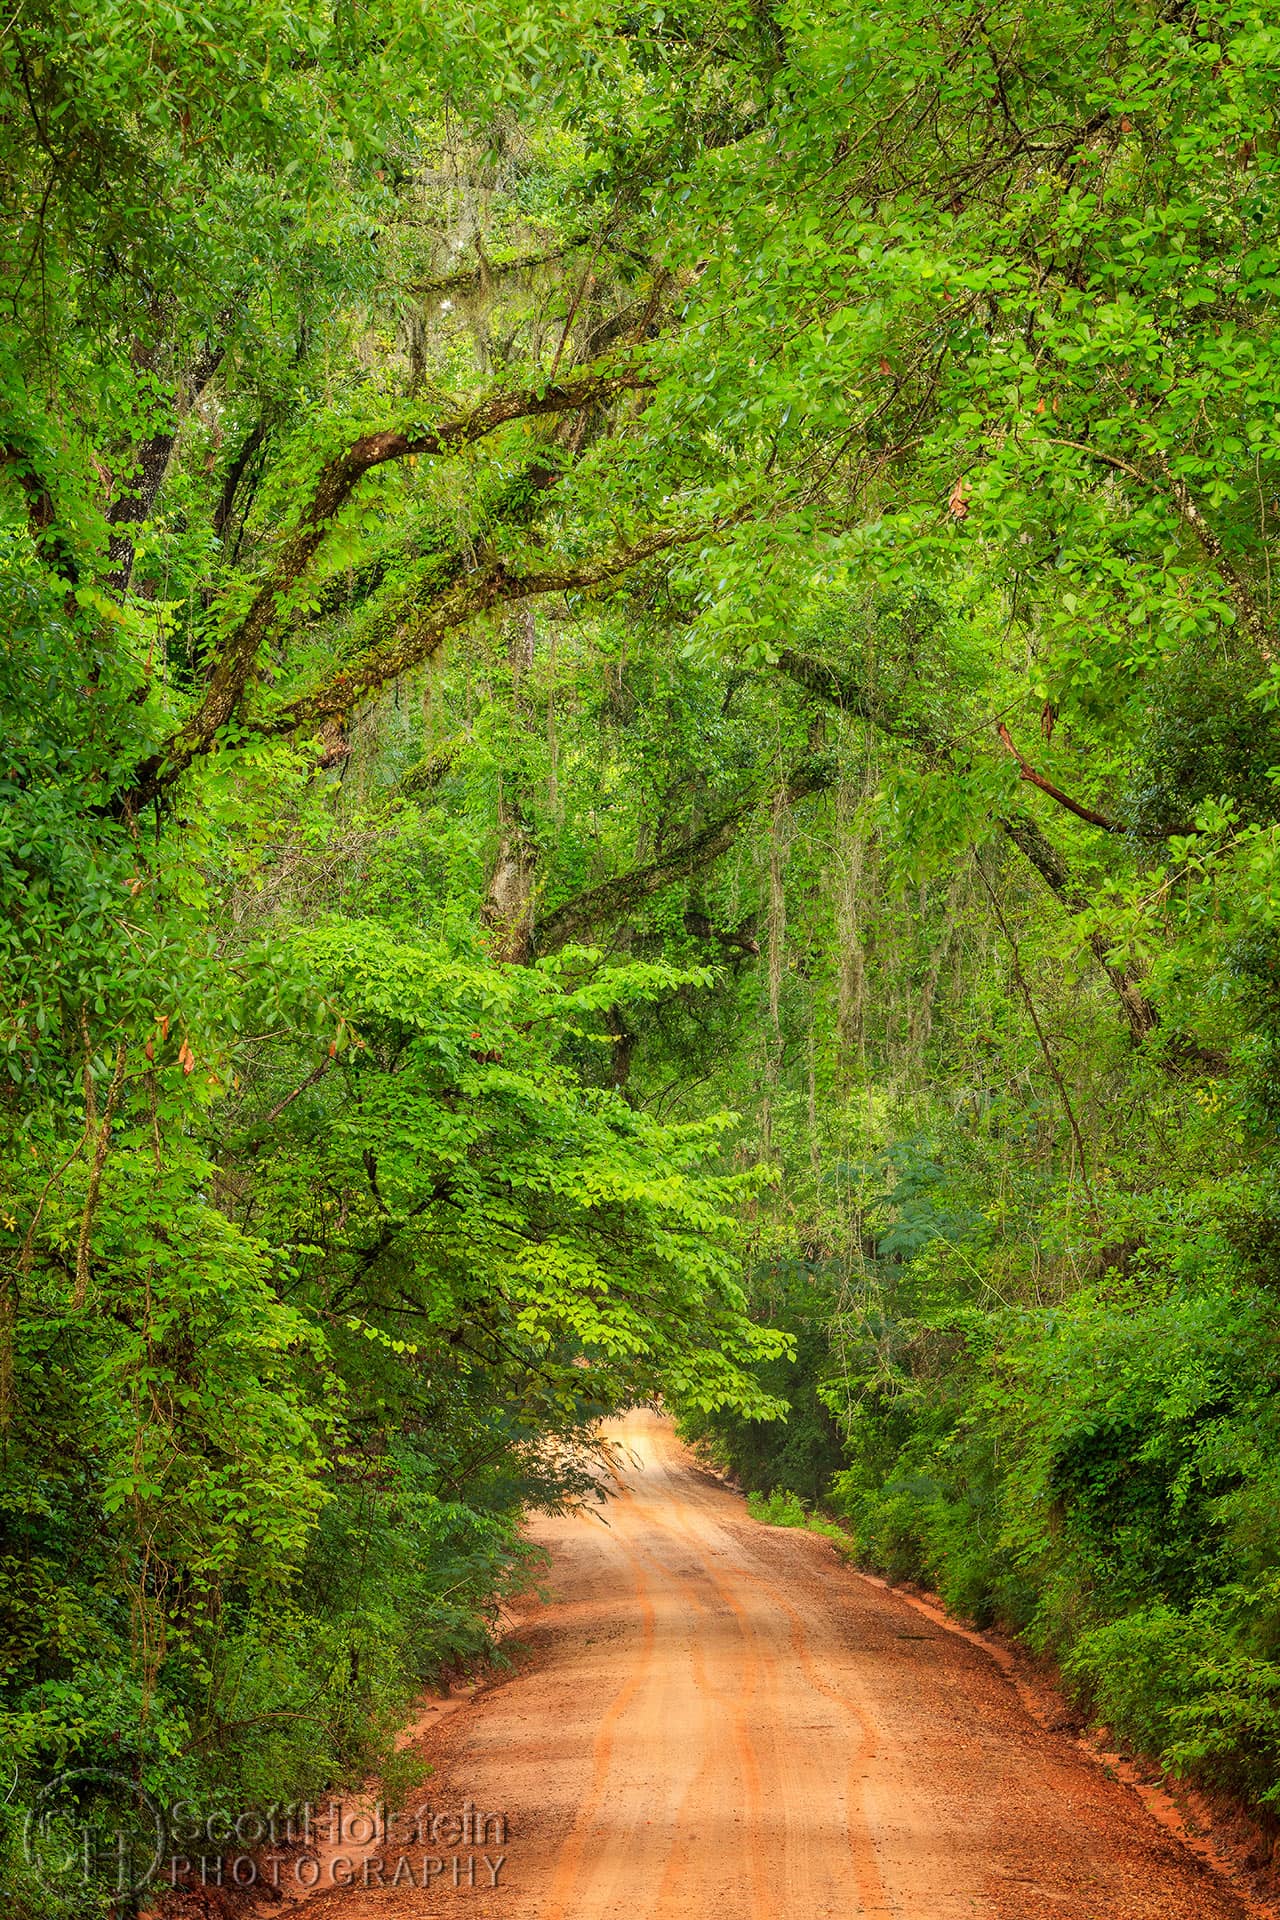 Landscape Photography Prints: The red clay of Sunny Hill Road winds beneath the verdant jungle of a full canopy in the late spring near Tallahassee, Florida.